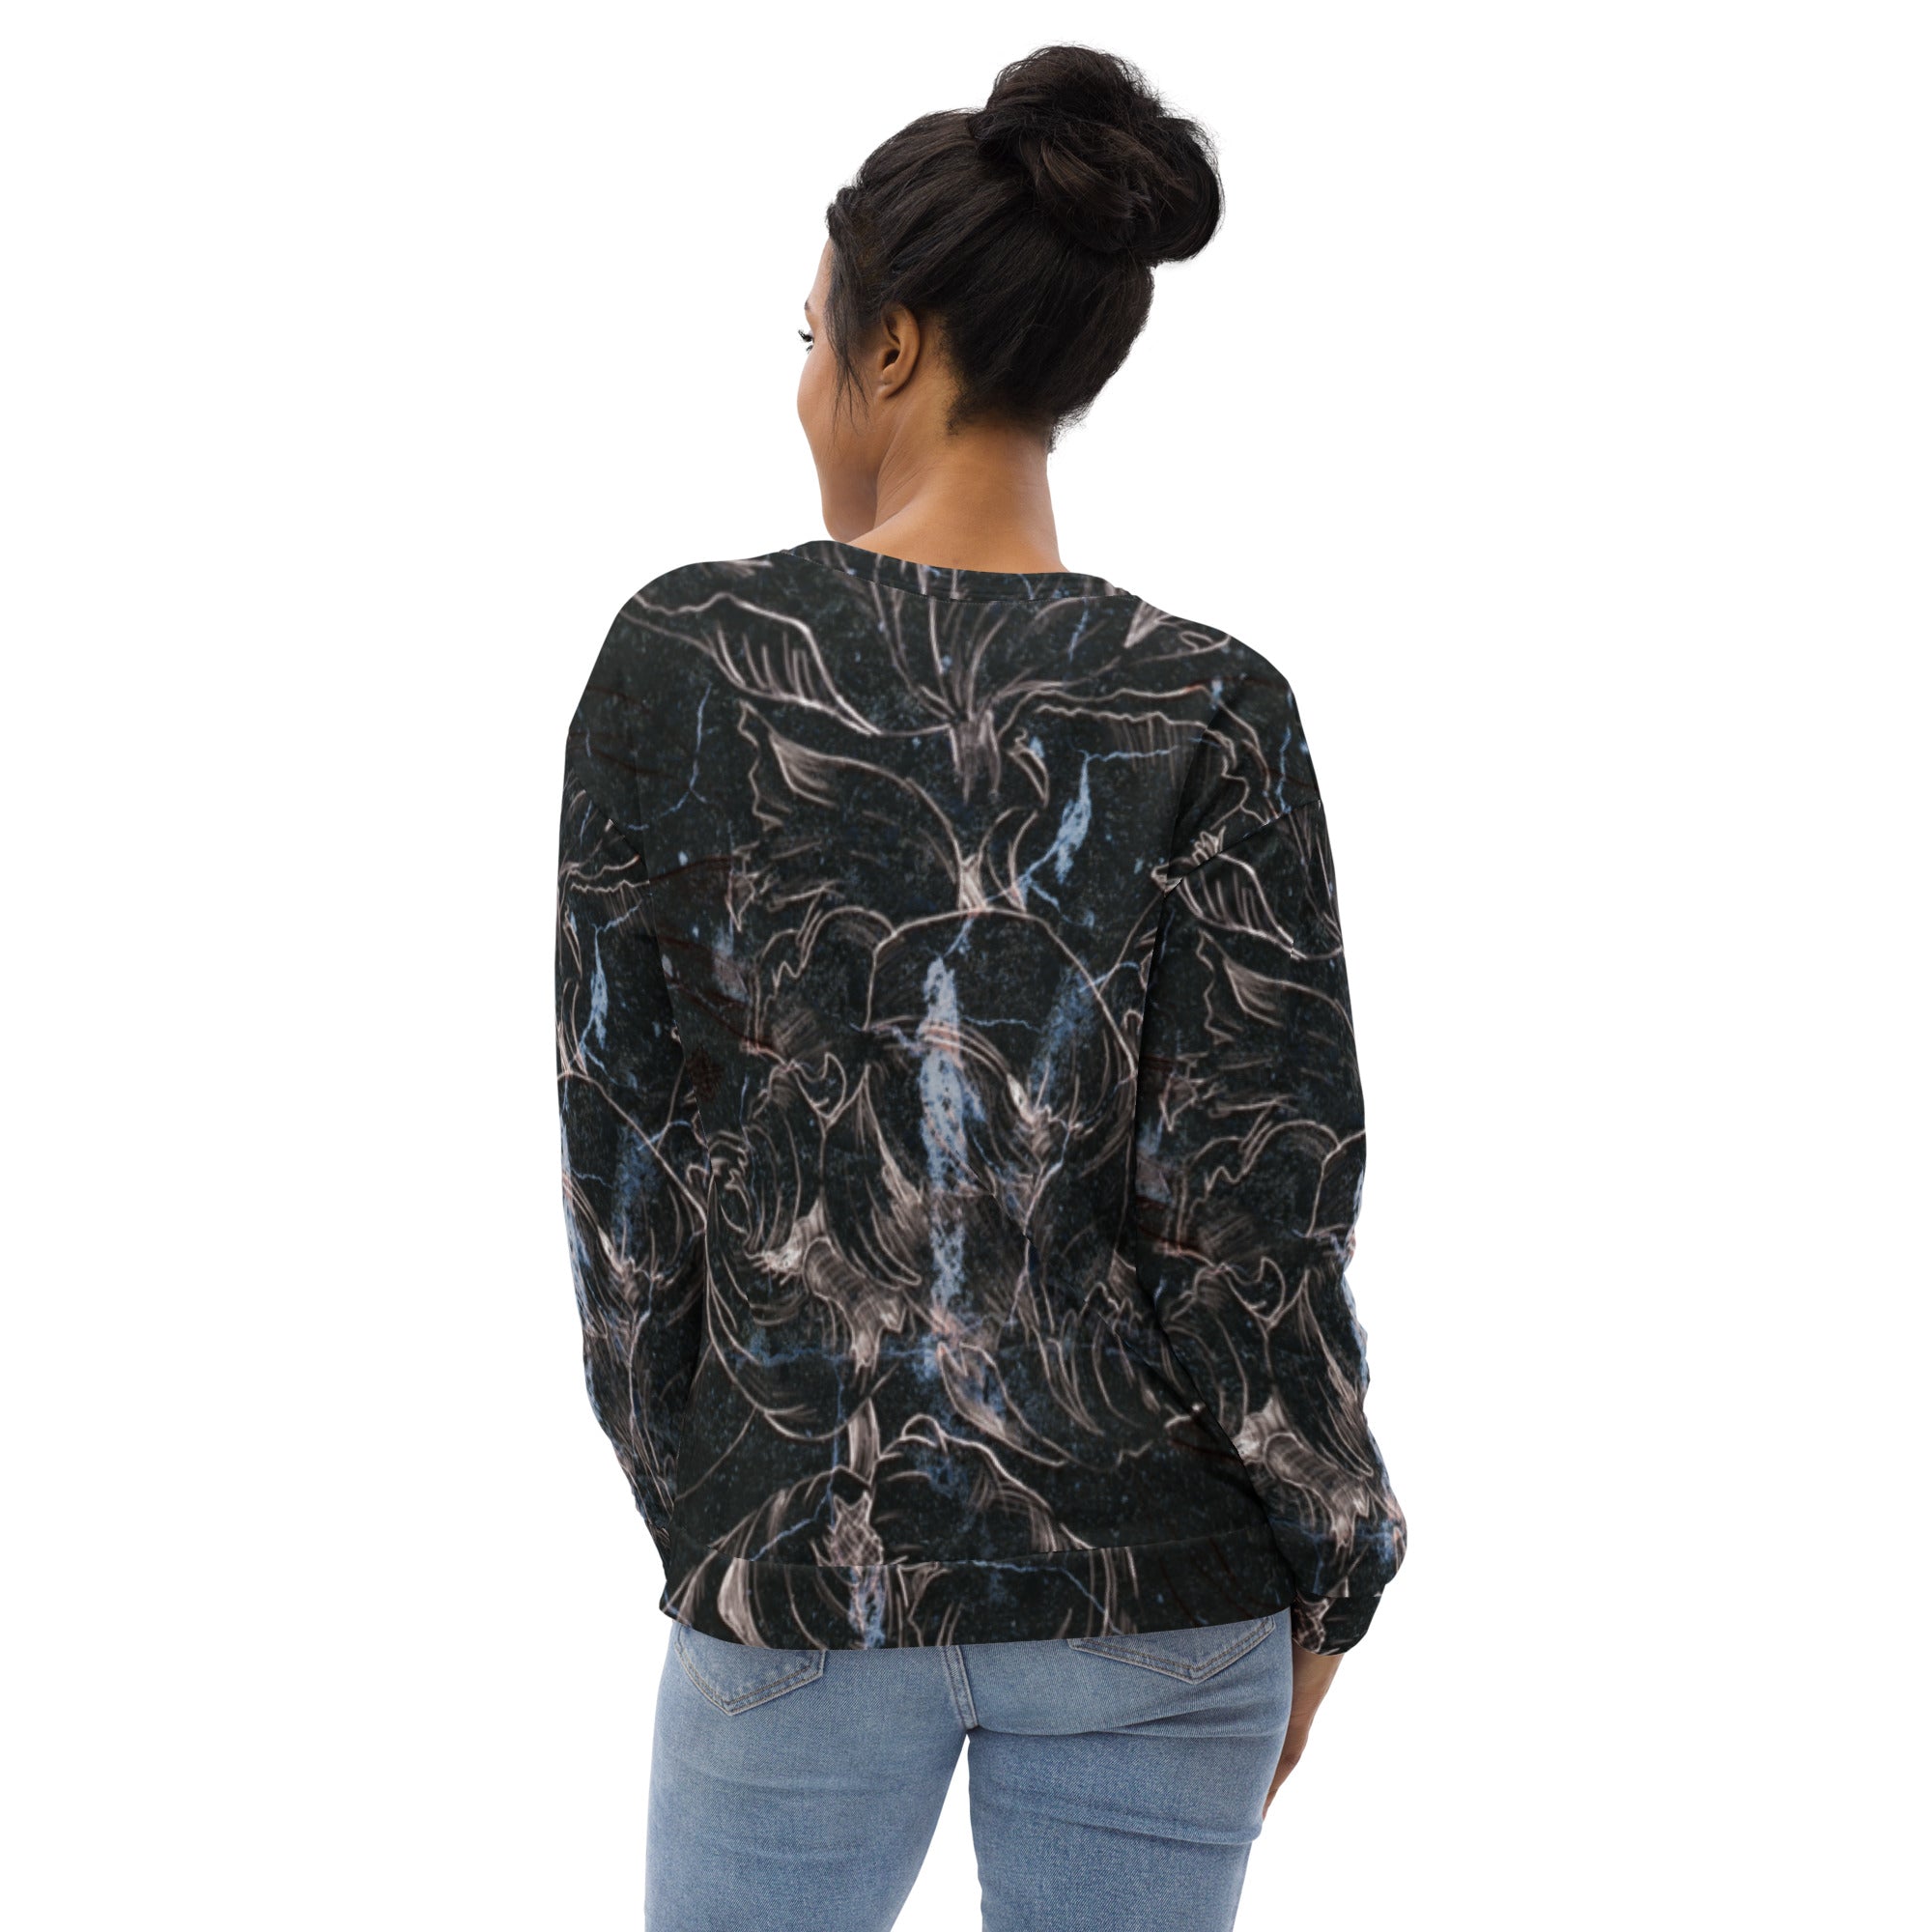 Anacotte Unisex Abstract Floral Full Printed Sweatshirt